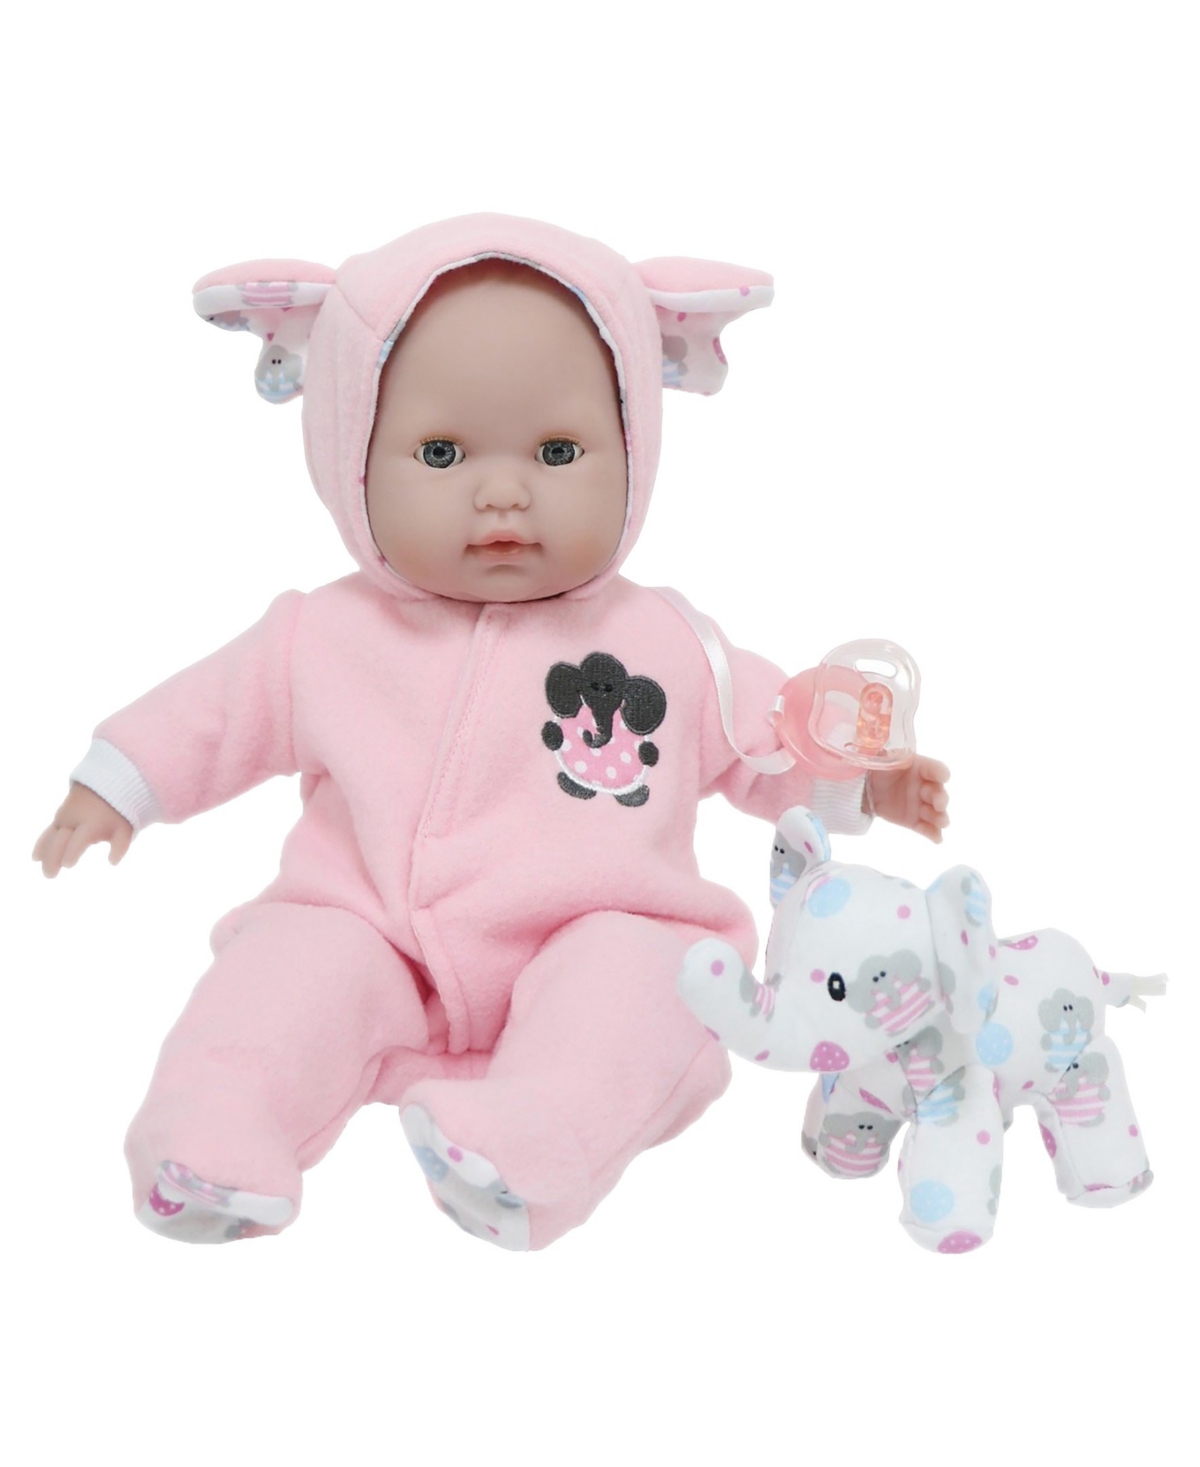 Jc Toys Berenguer Boutique 15" Soft Body Baby Doll Elephant Pink Outfit In Pink Elephant Theme